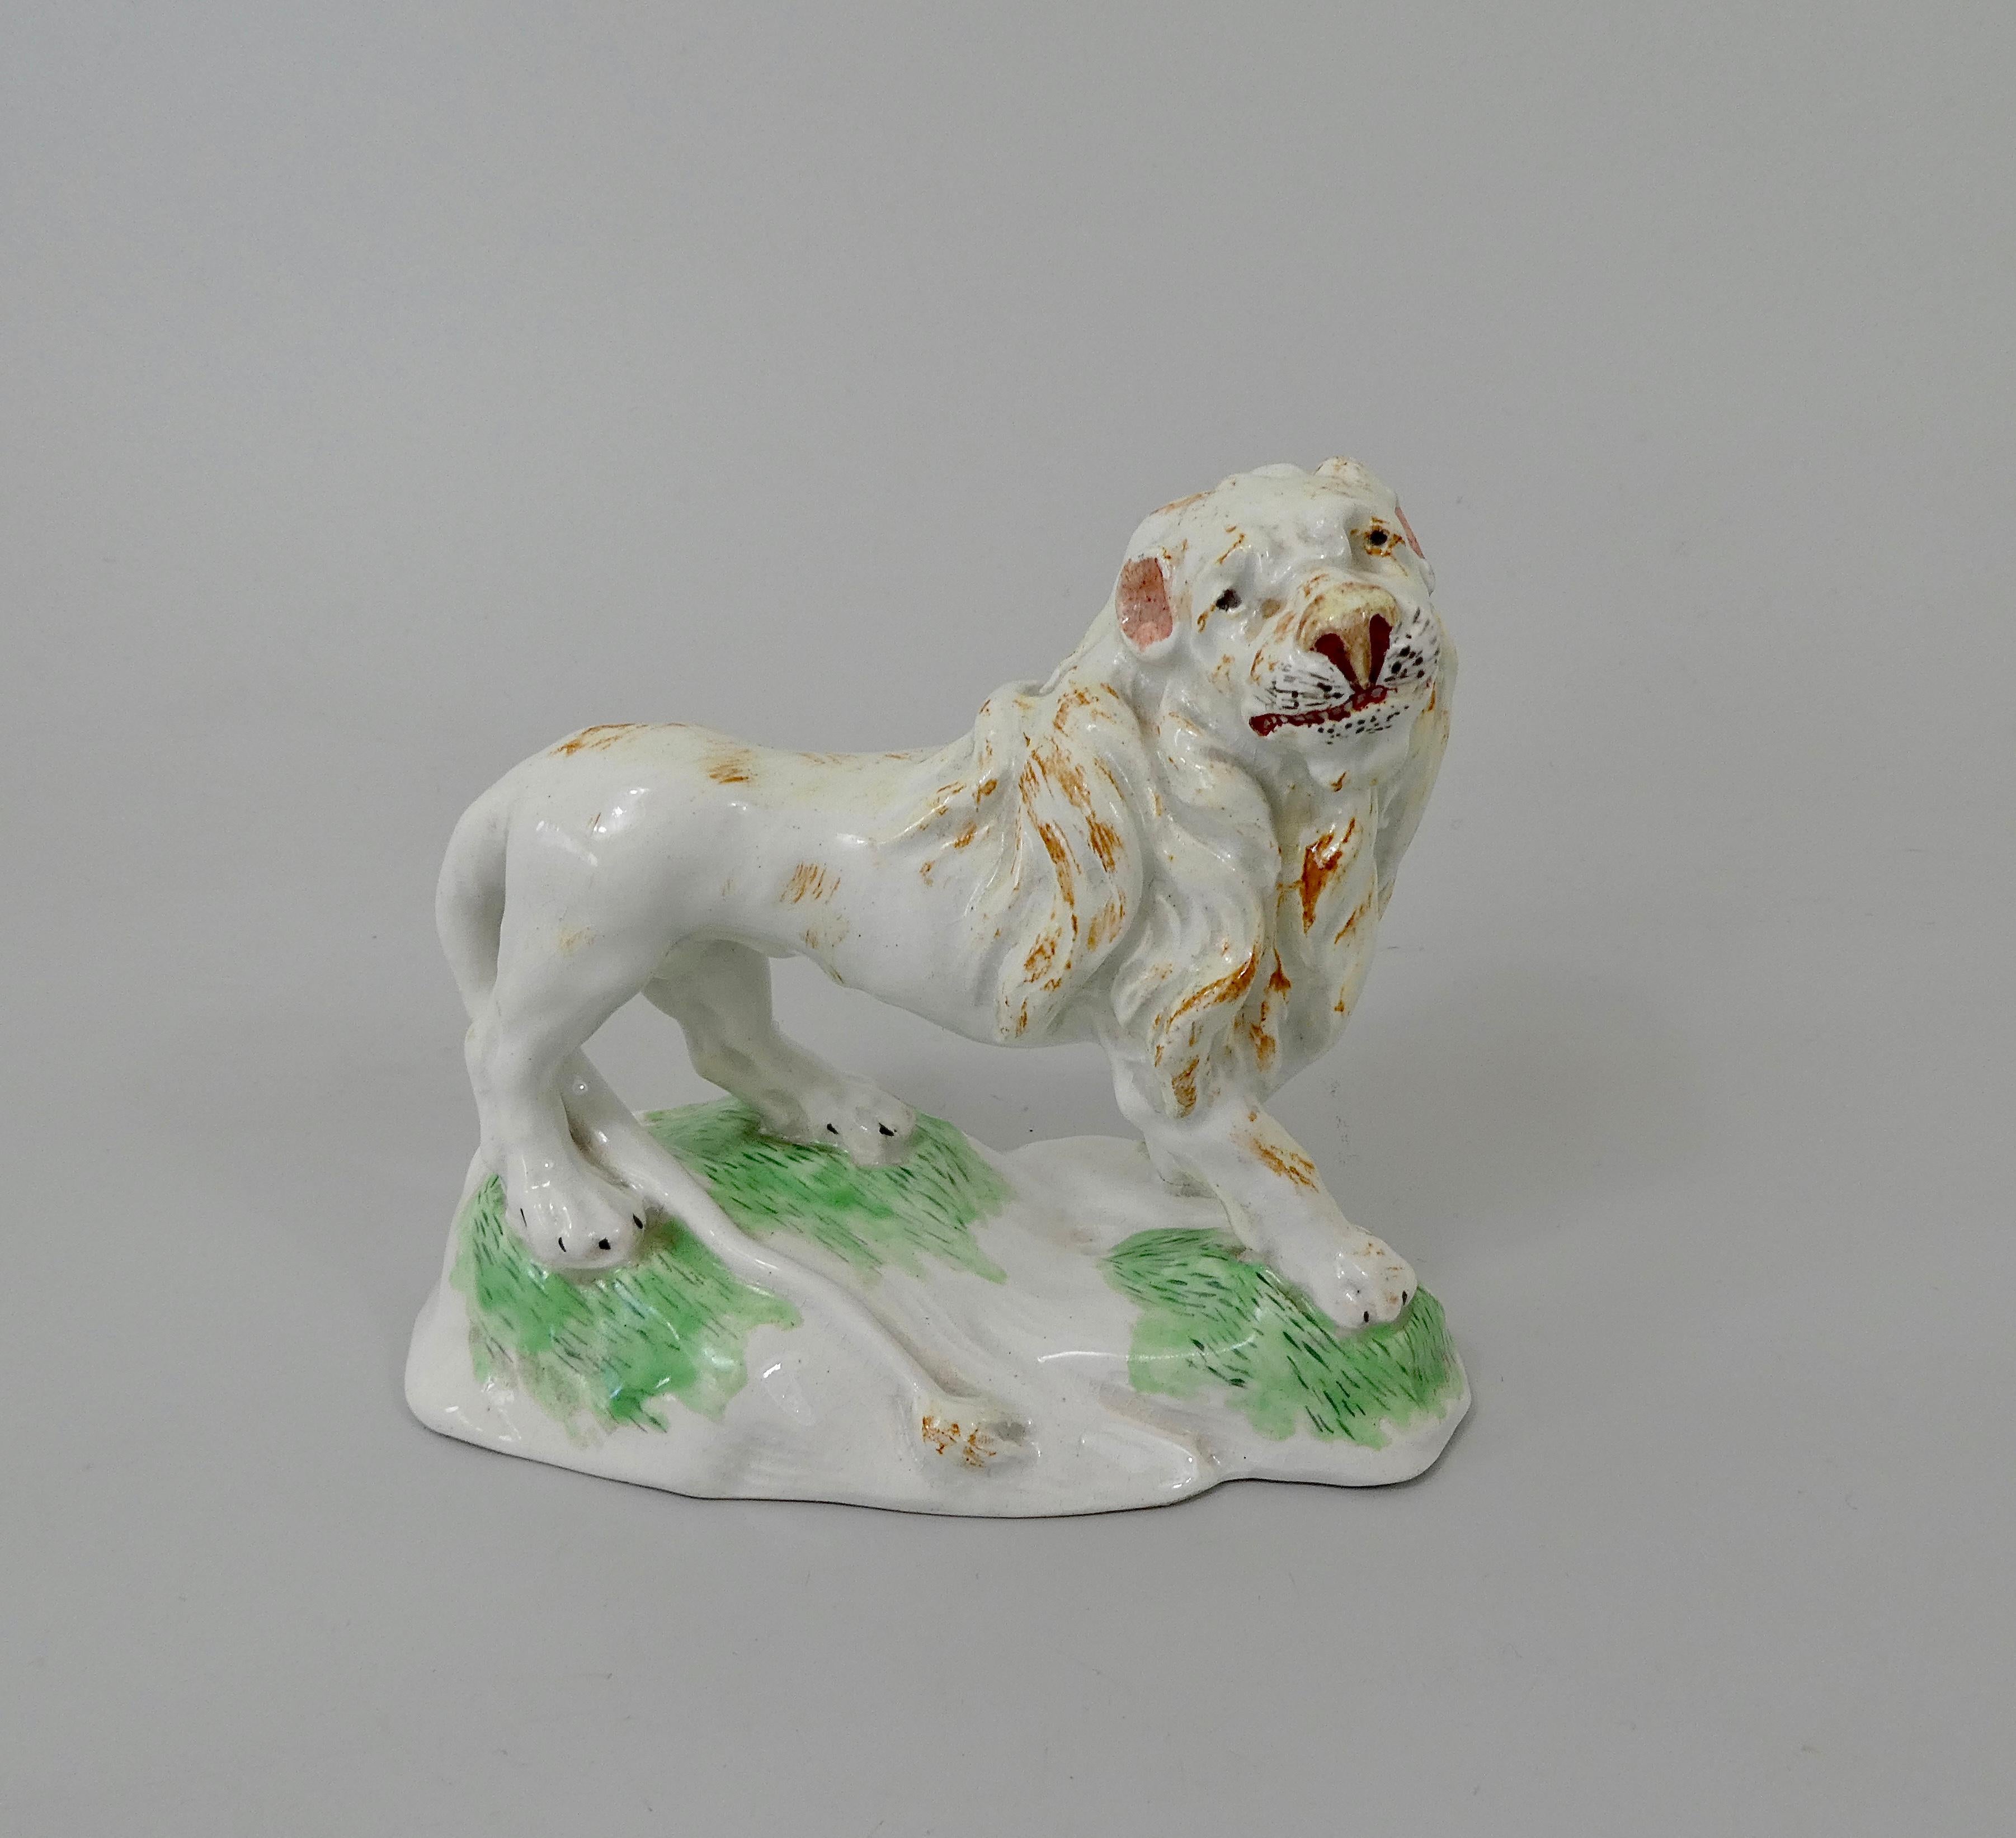 Rare Niderviller Faience figure, Count Custine period, circa 1780. Finely modeled as a standing lion, the head and mane being particularly well defined, along with an incongruously long tail.
Set upon an irregular mound base, the painting of the